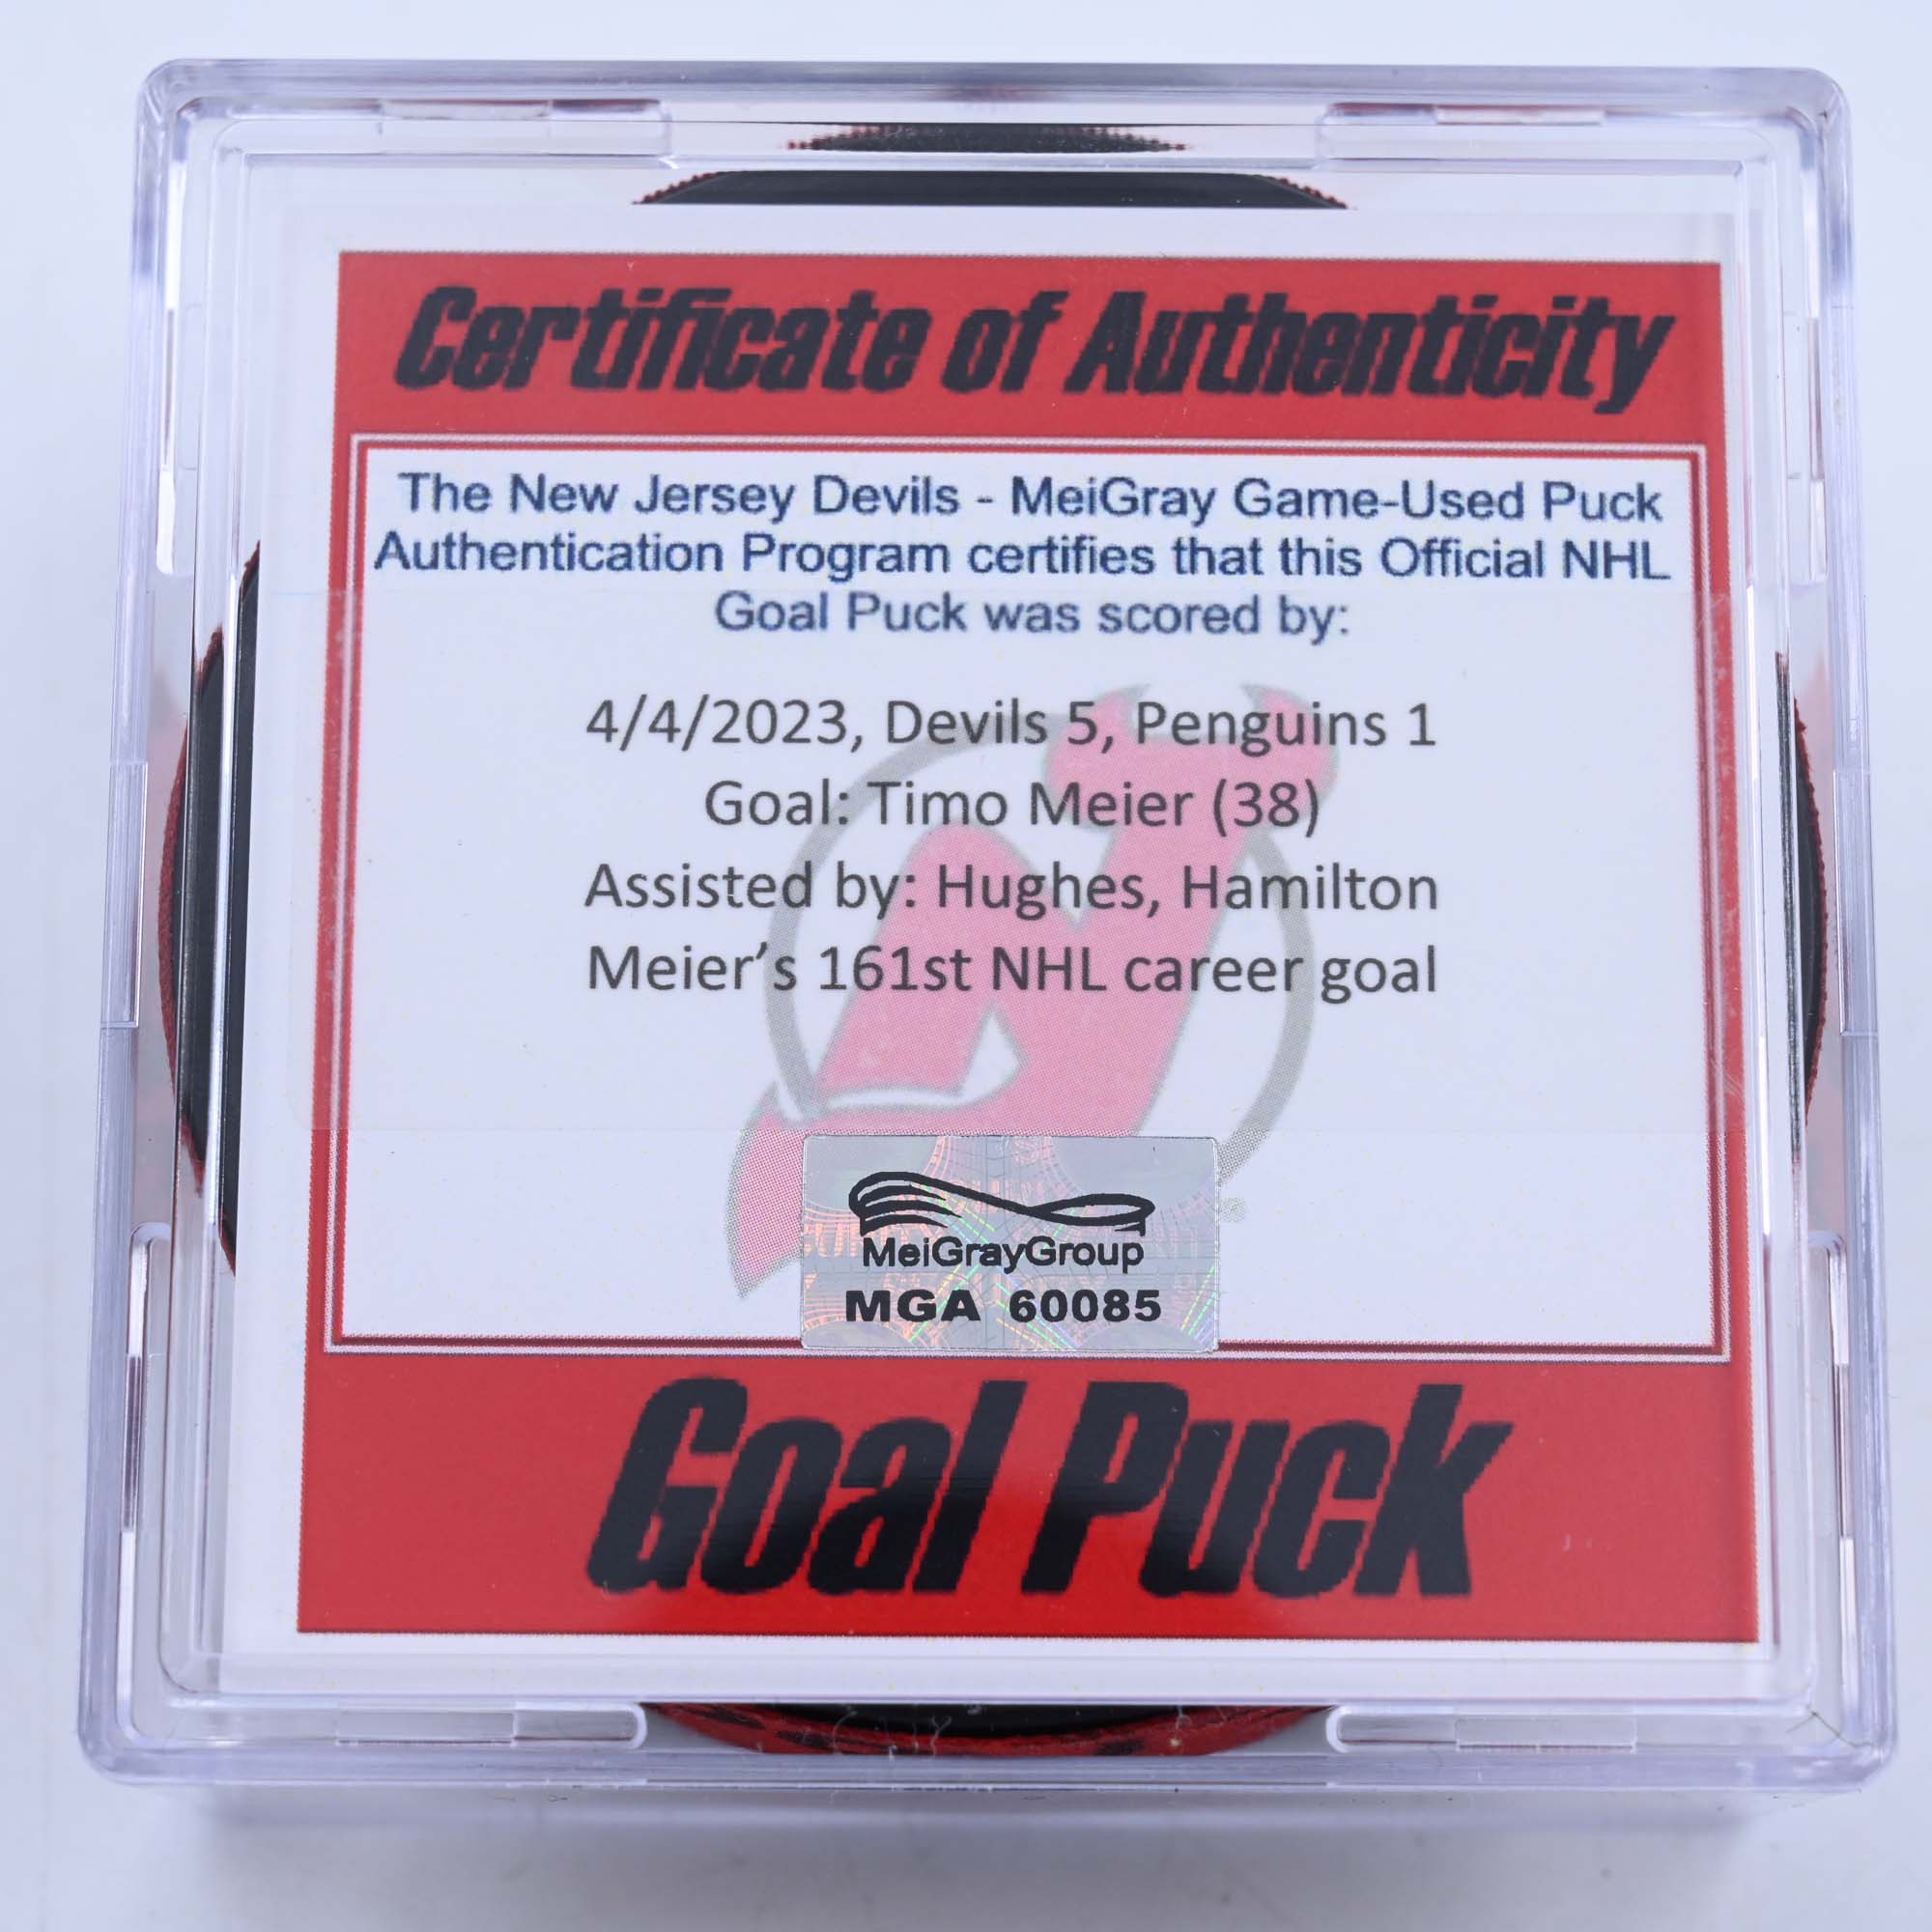 New Jersey Devils 40th Anniversary Official Game Hockey Puck